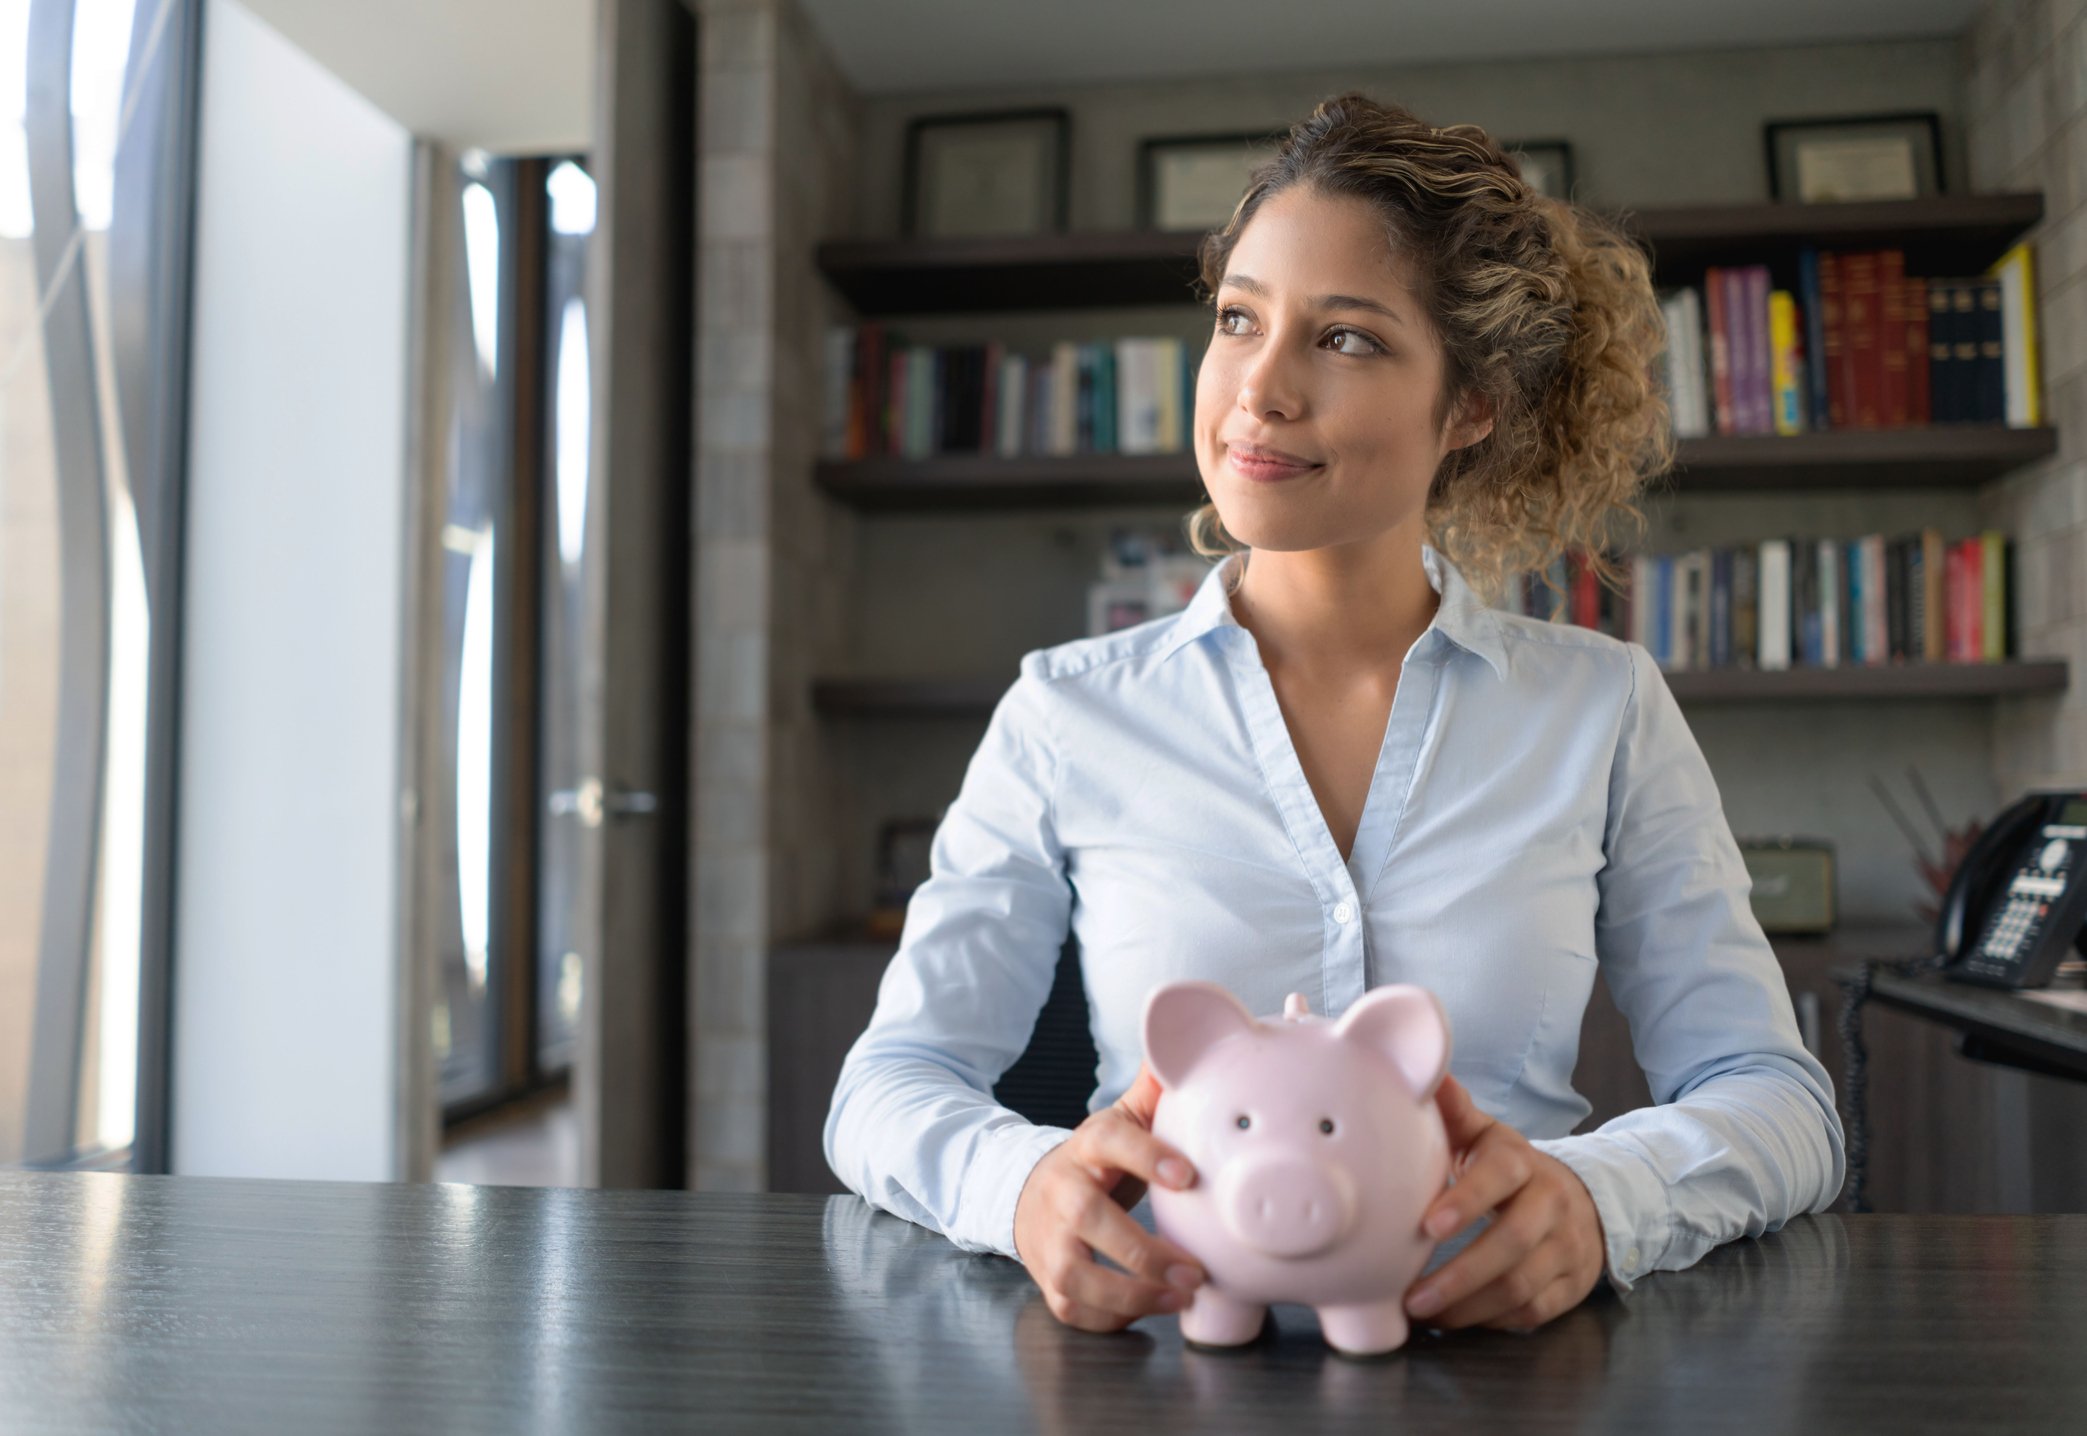 person thinking while holding piggy bank